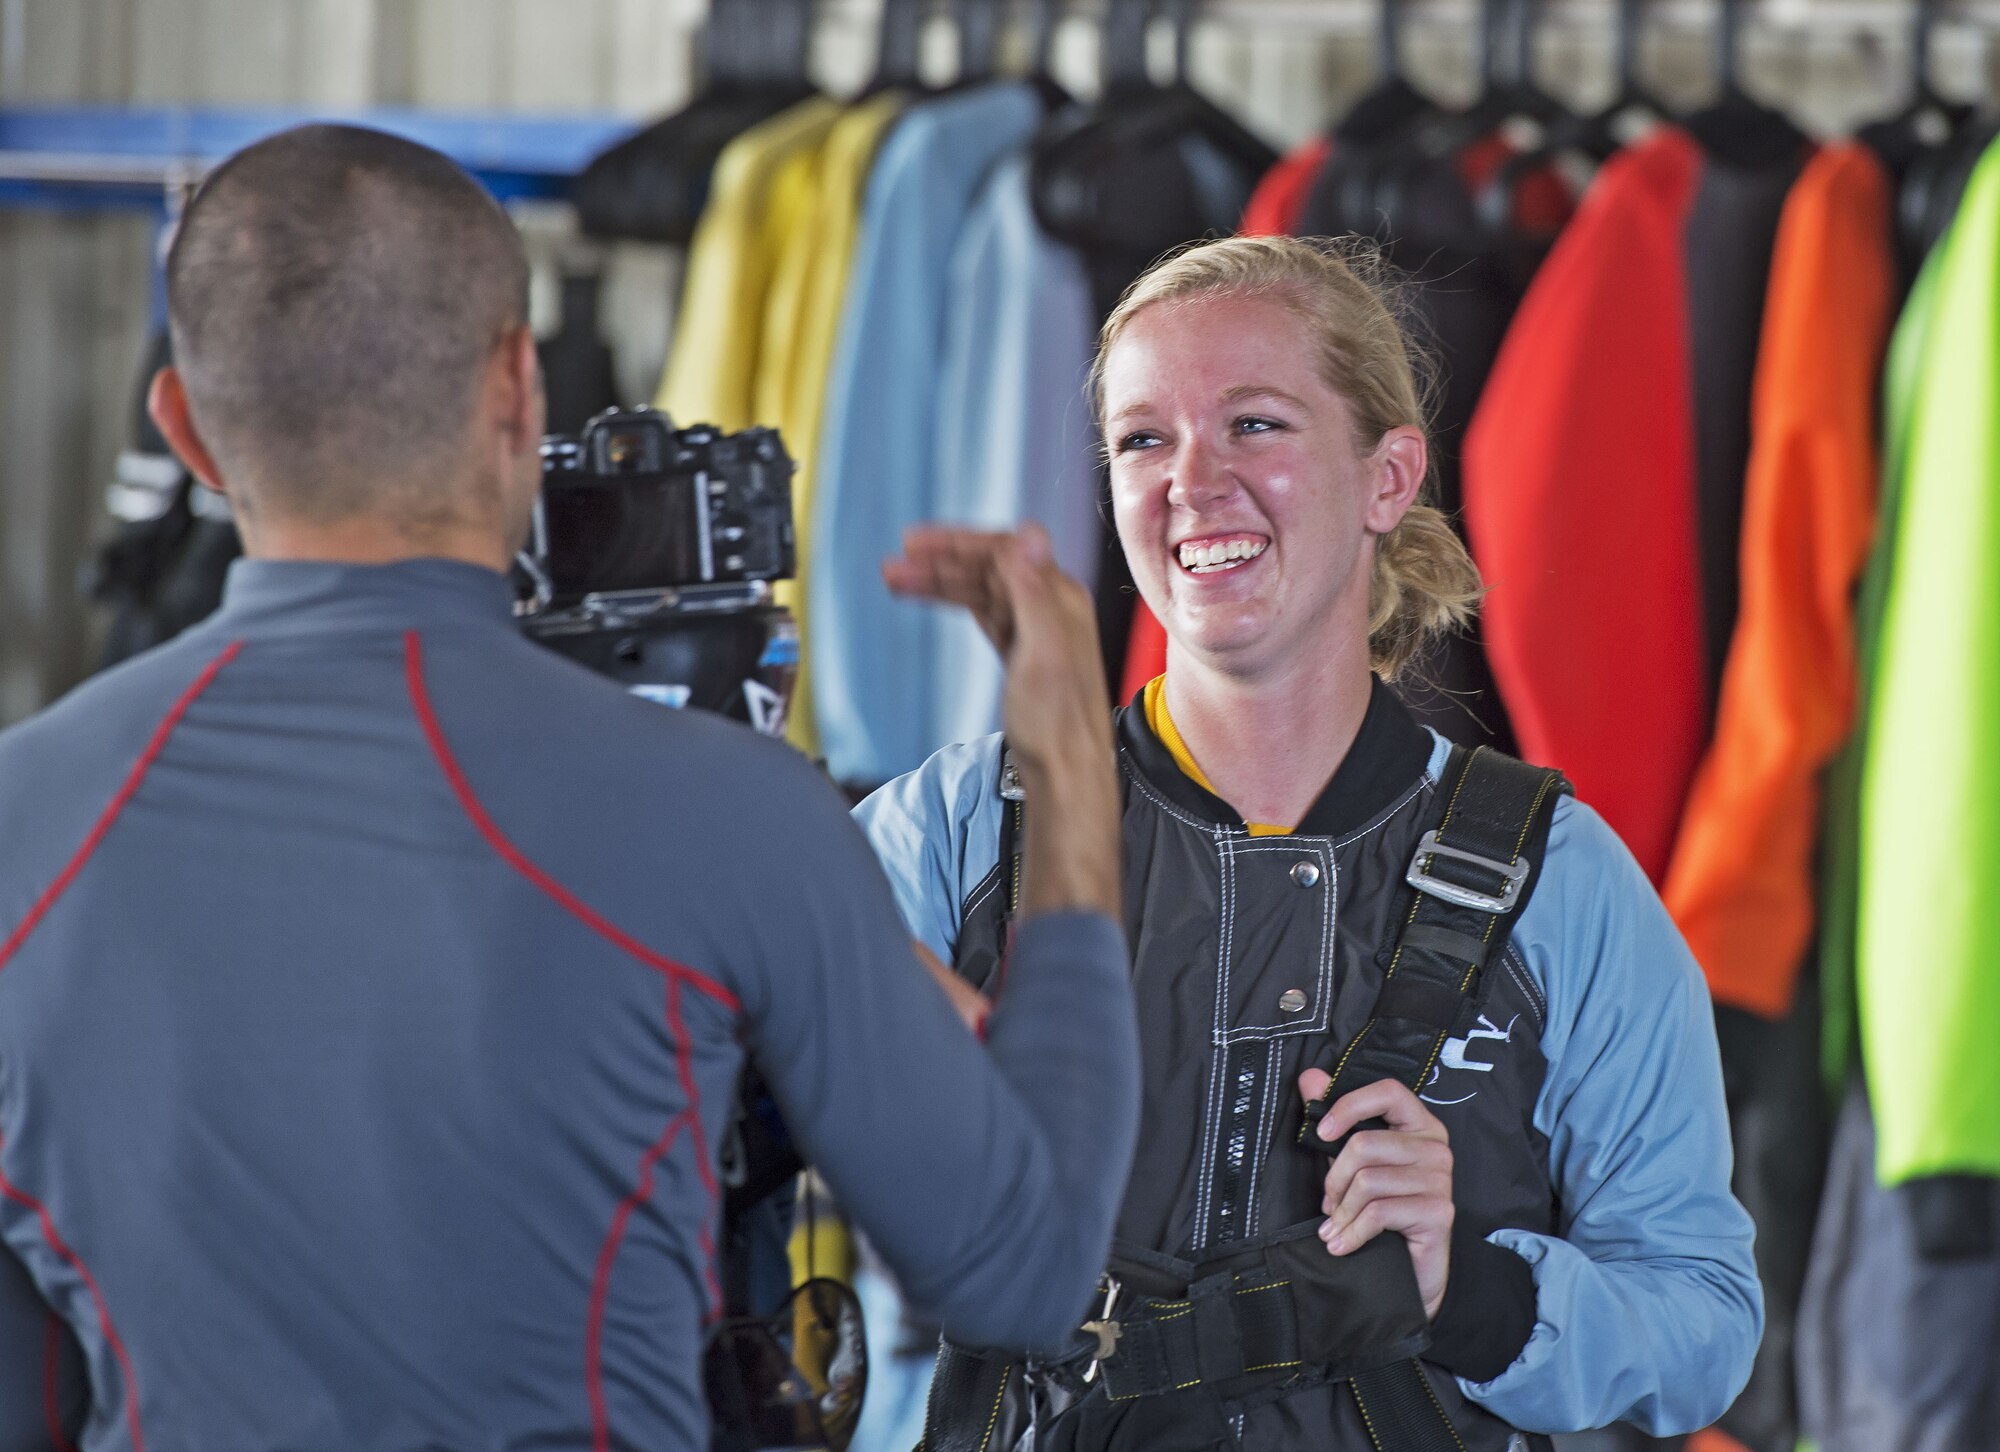 U.S. Airman 1st Class Elizabeth Coleman, 20th Equipment Maintenance Squadron munition systems specialist smiles during an on-camera interview before going skydiving in Chester, S.C., Aug. 11, 2018.